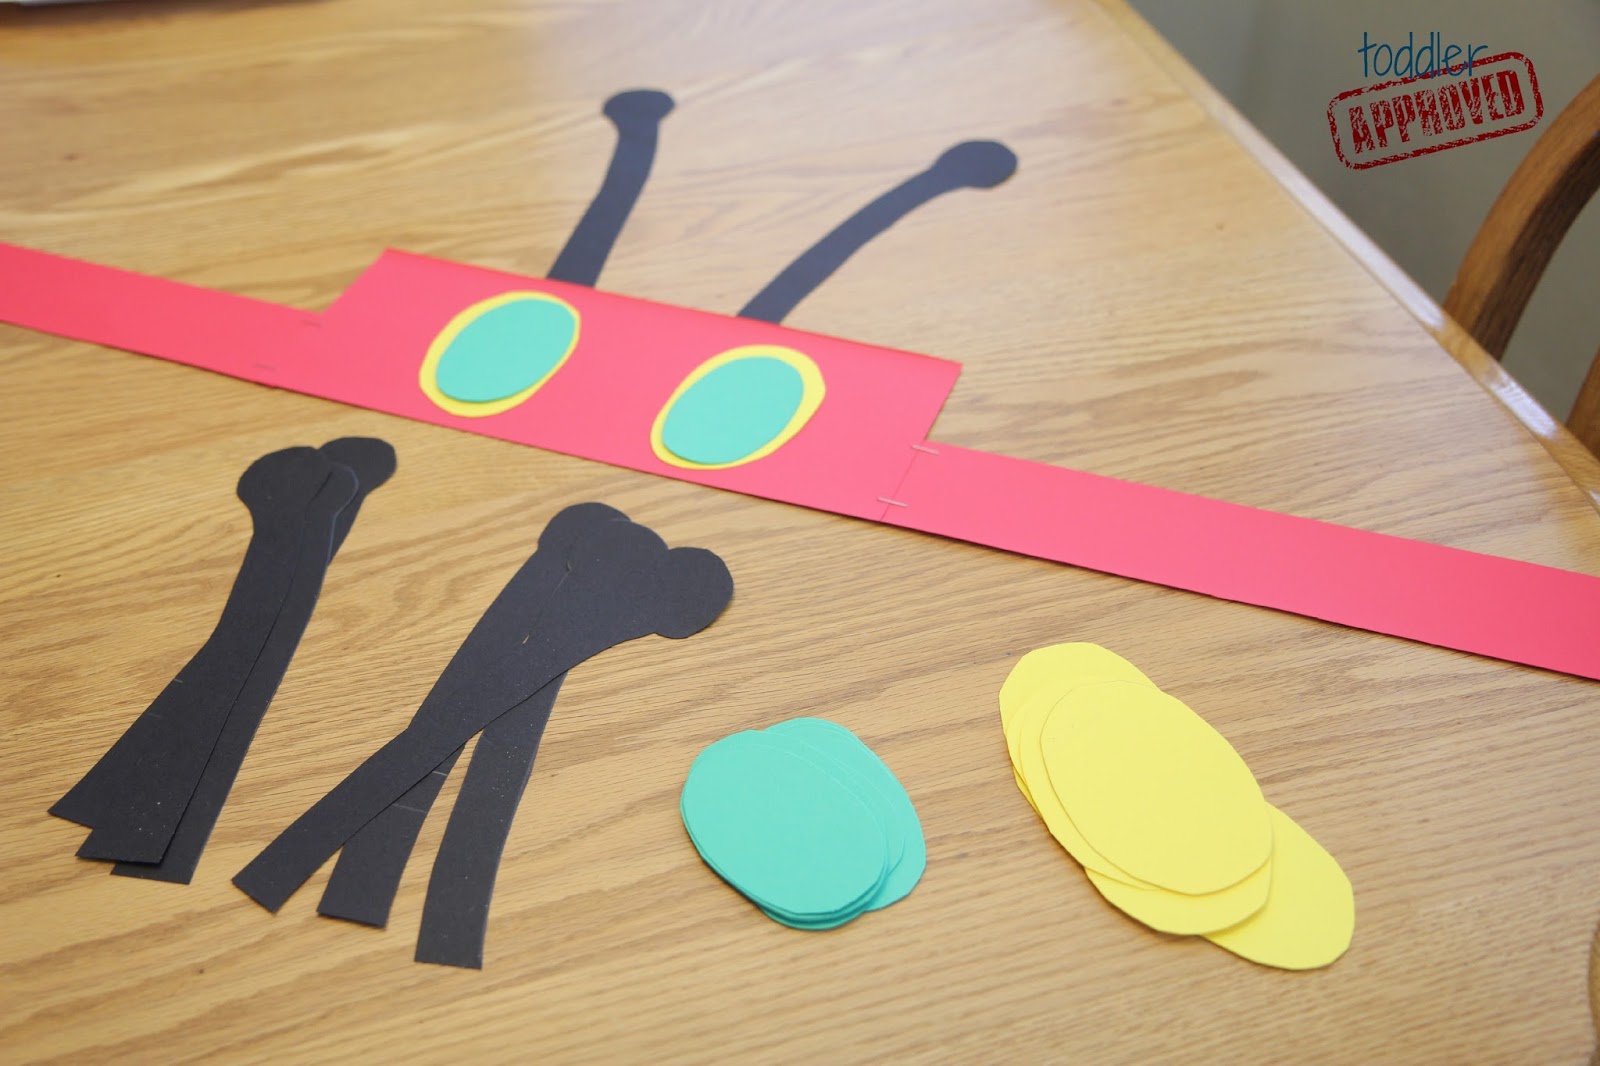 Toddler Approved! 4 Very Hungry Caterpillar Activities